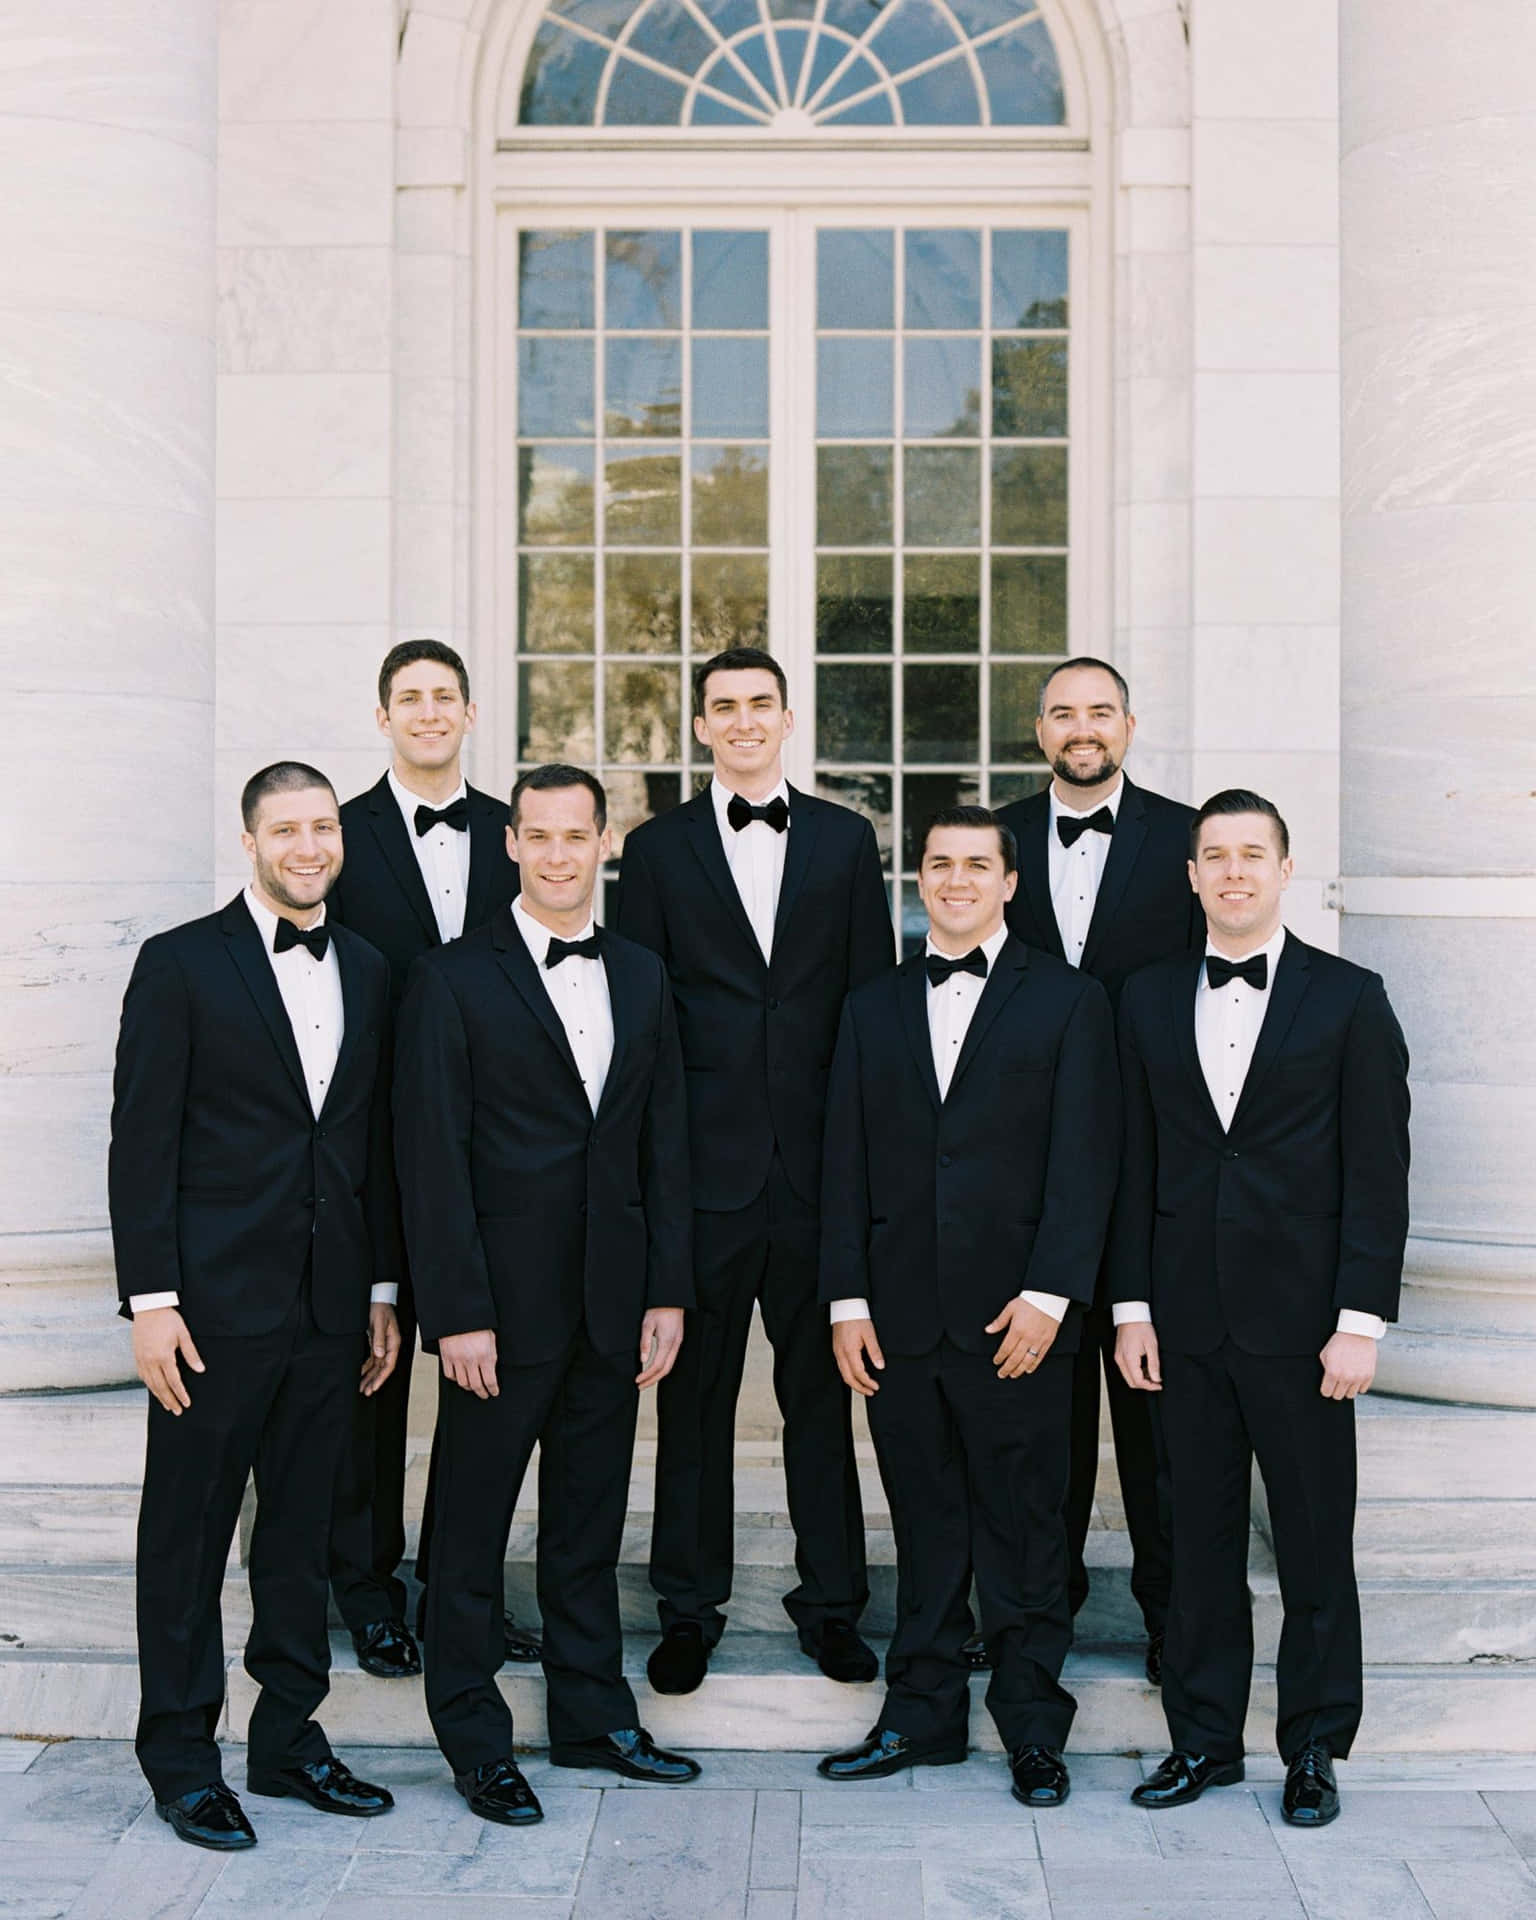 Groomsmen Get Ready For The Big Day